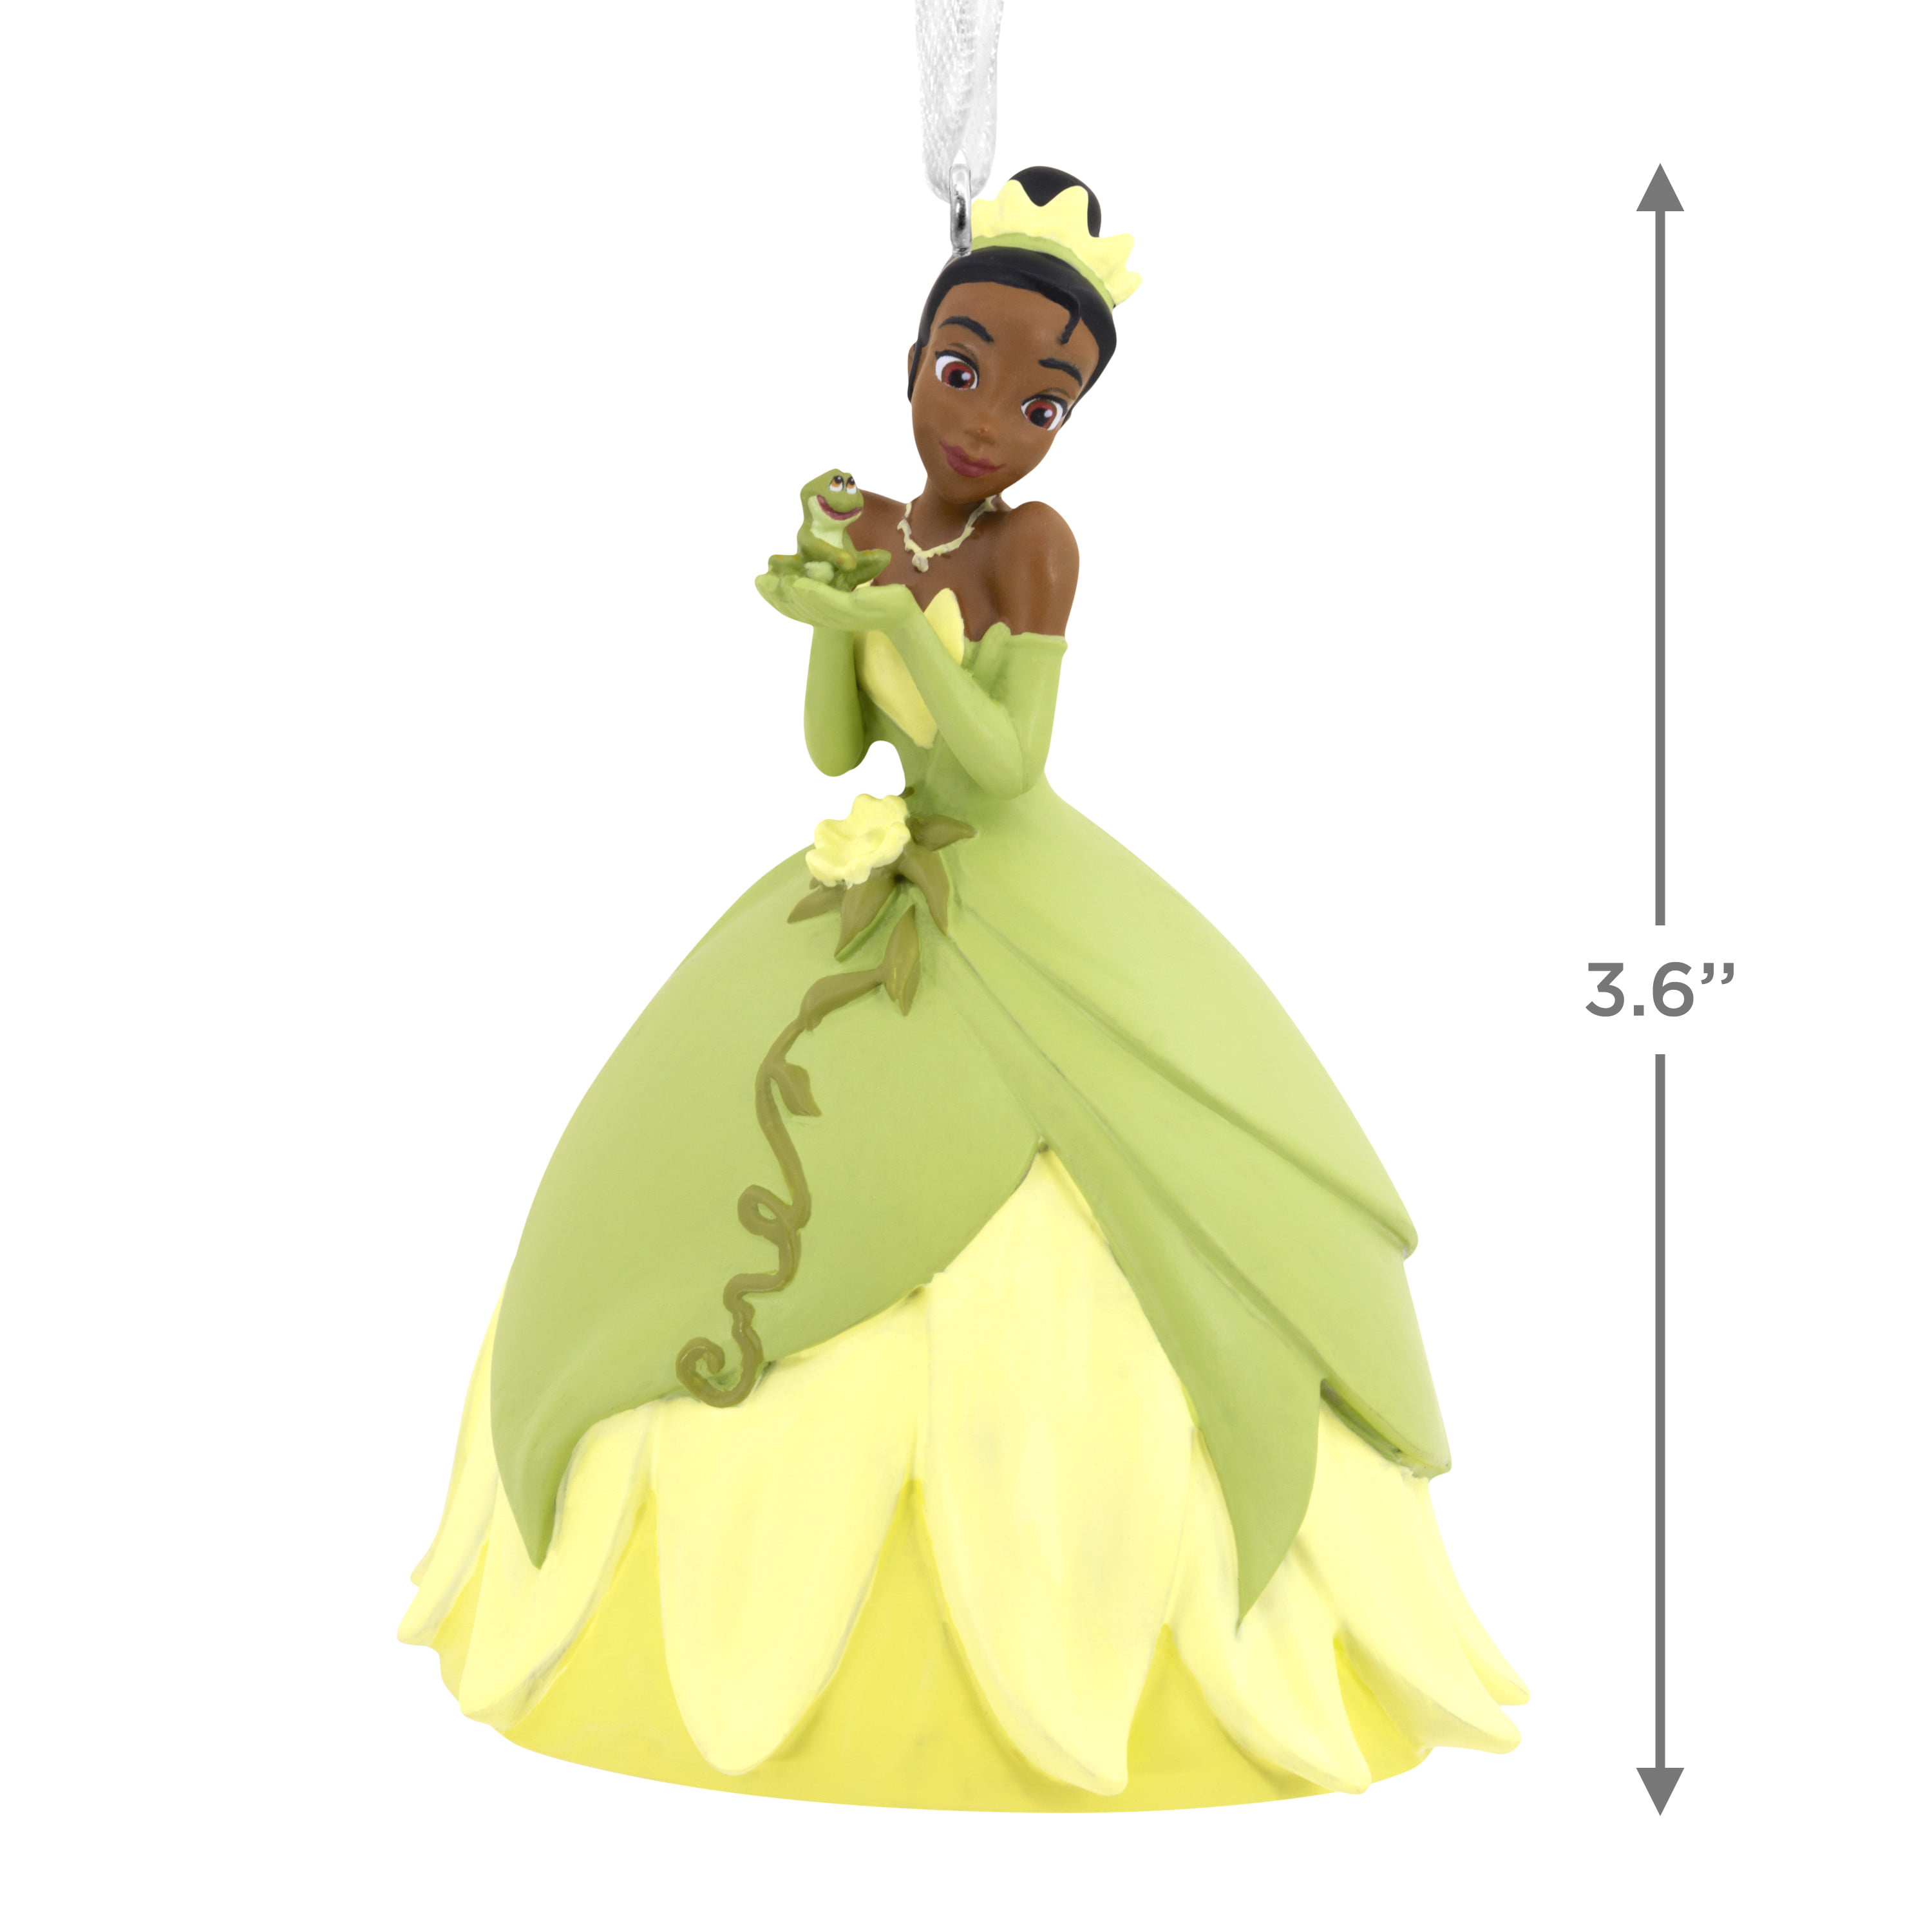 alexis jo recommends Tiana Pictures From Princess And The Frog